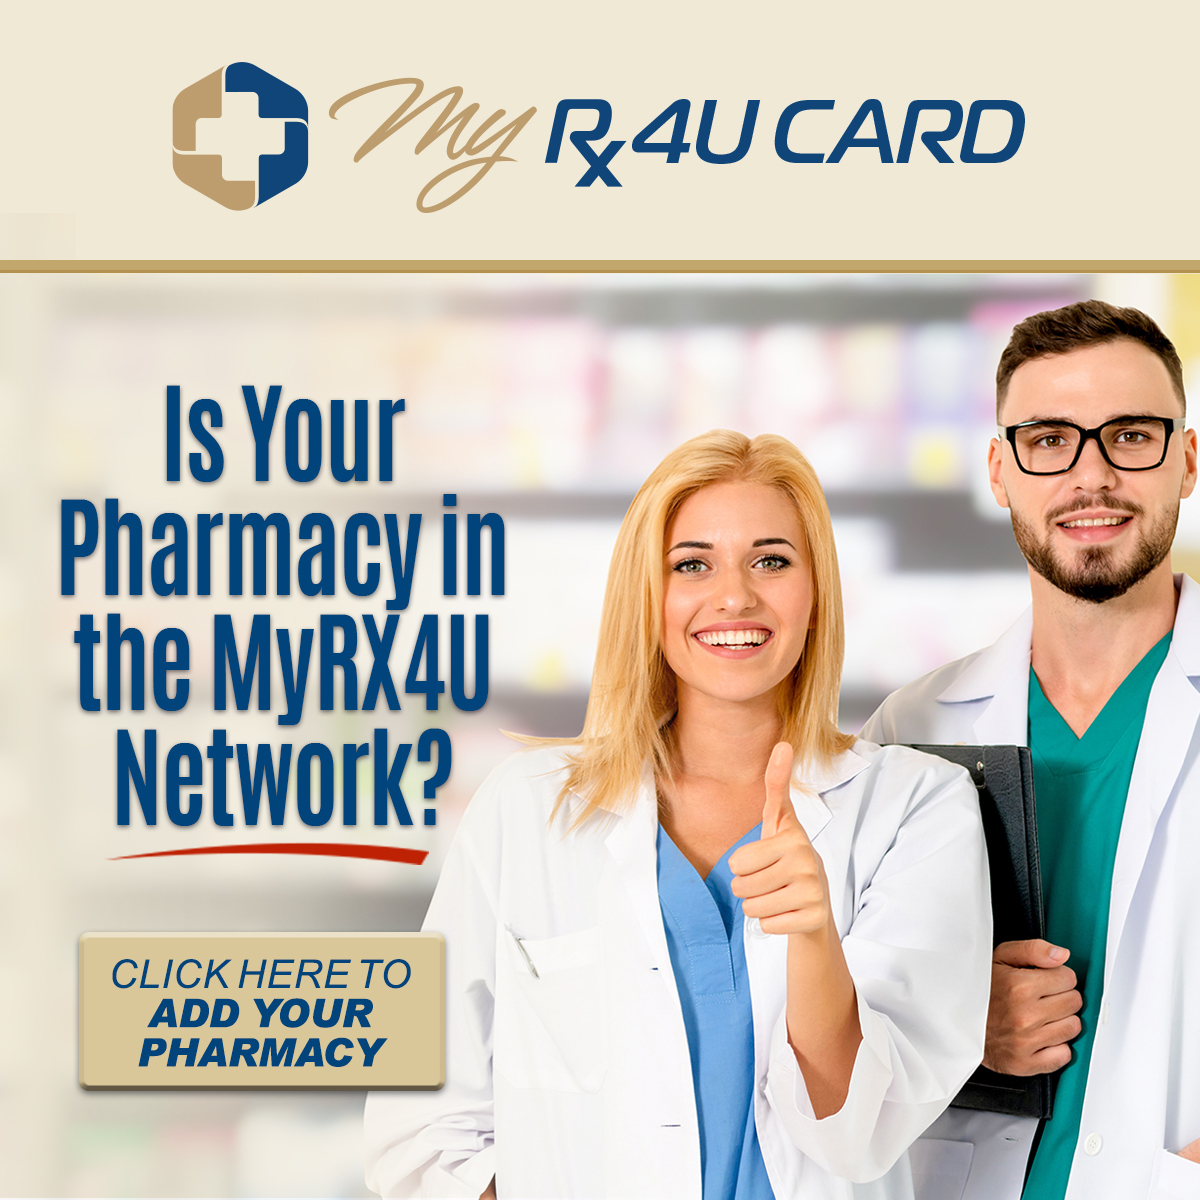 Is Your Pharmacy in the MyRX4U Network? Click here to add your pharmacy.
Shows younger female witha thumbs up and male both with white lab coats working at a pharmacy.